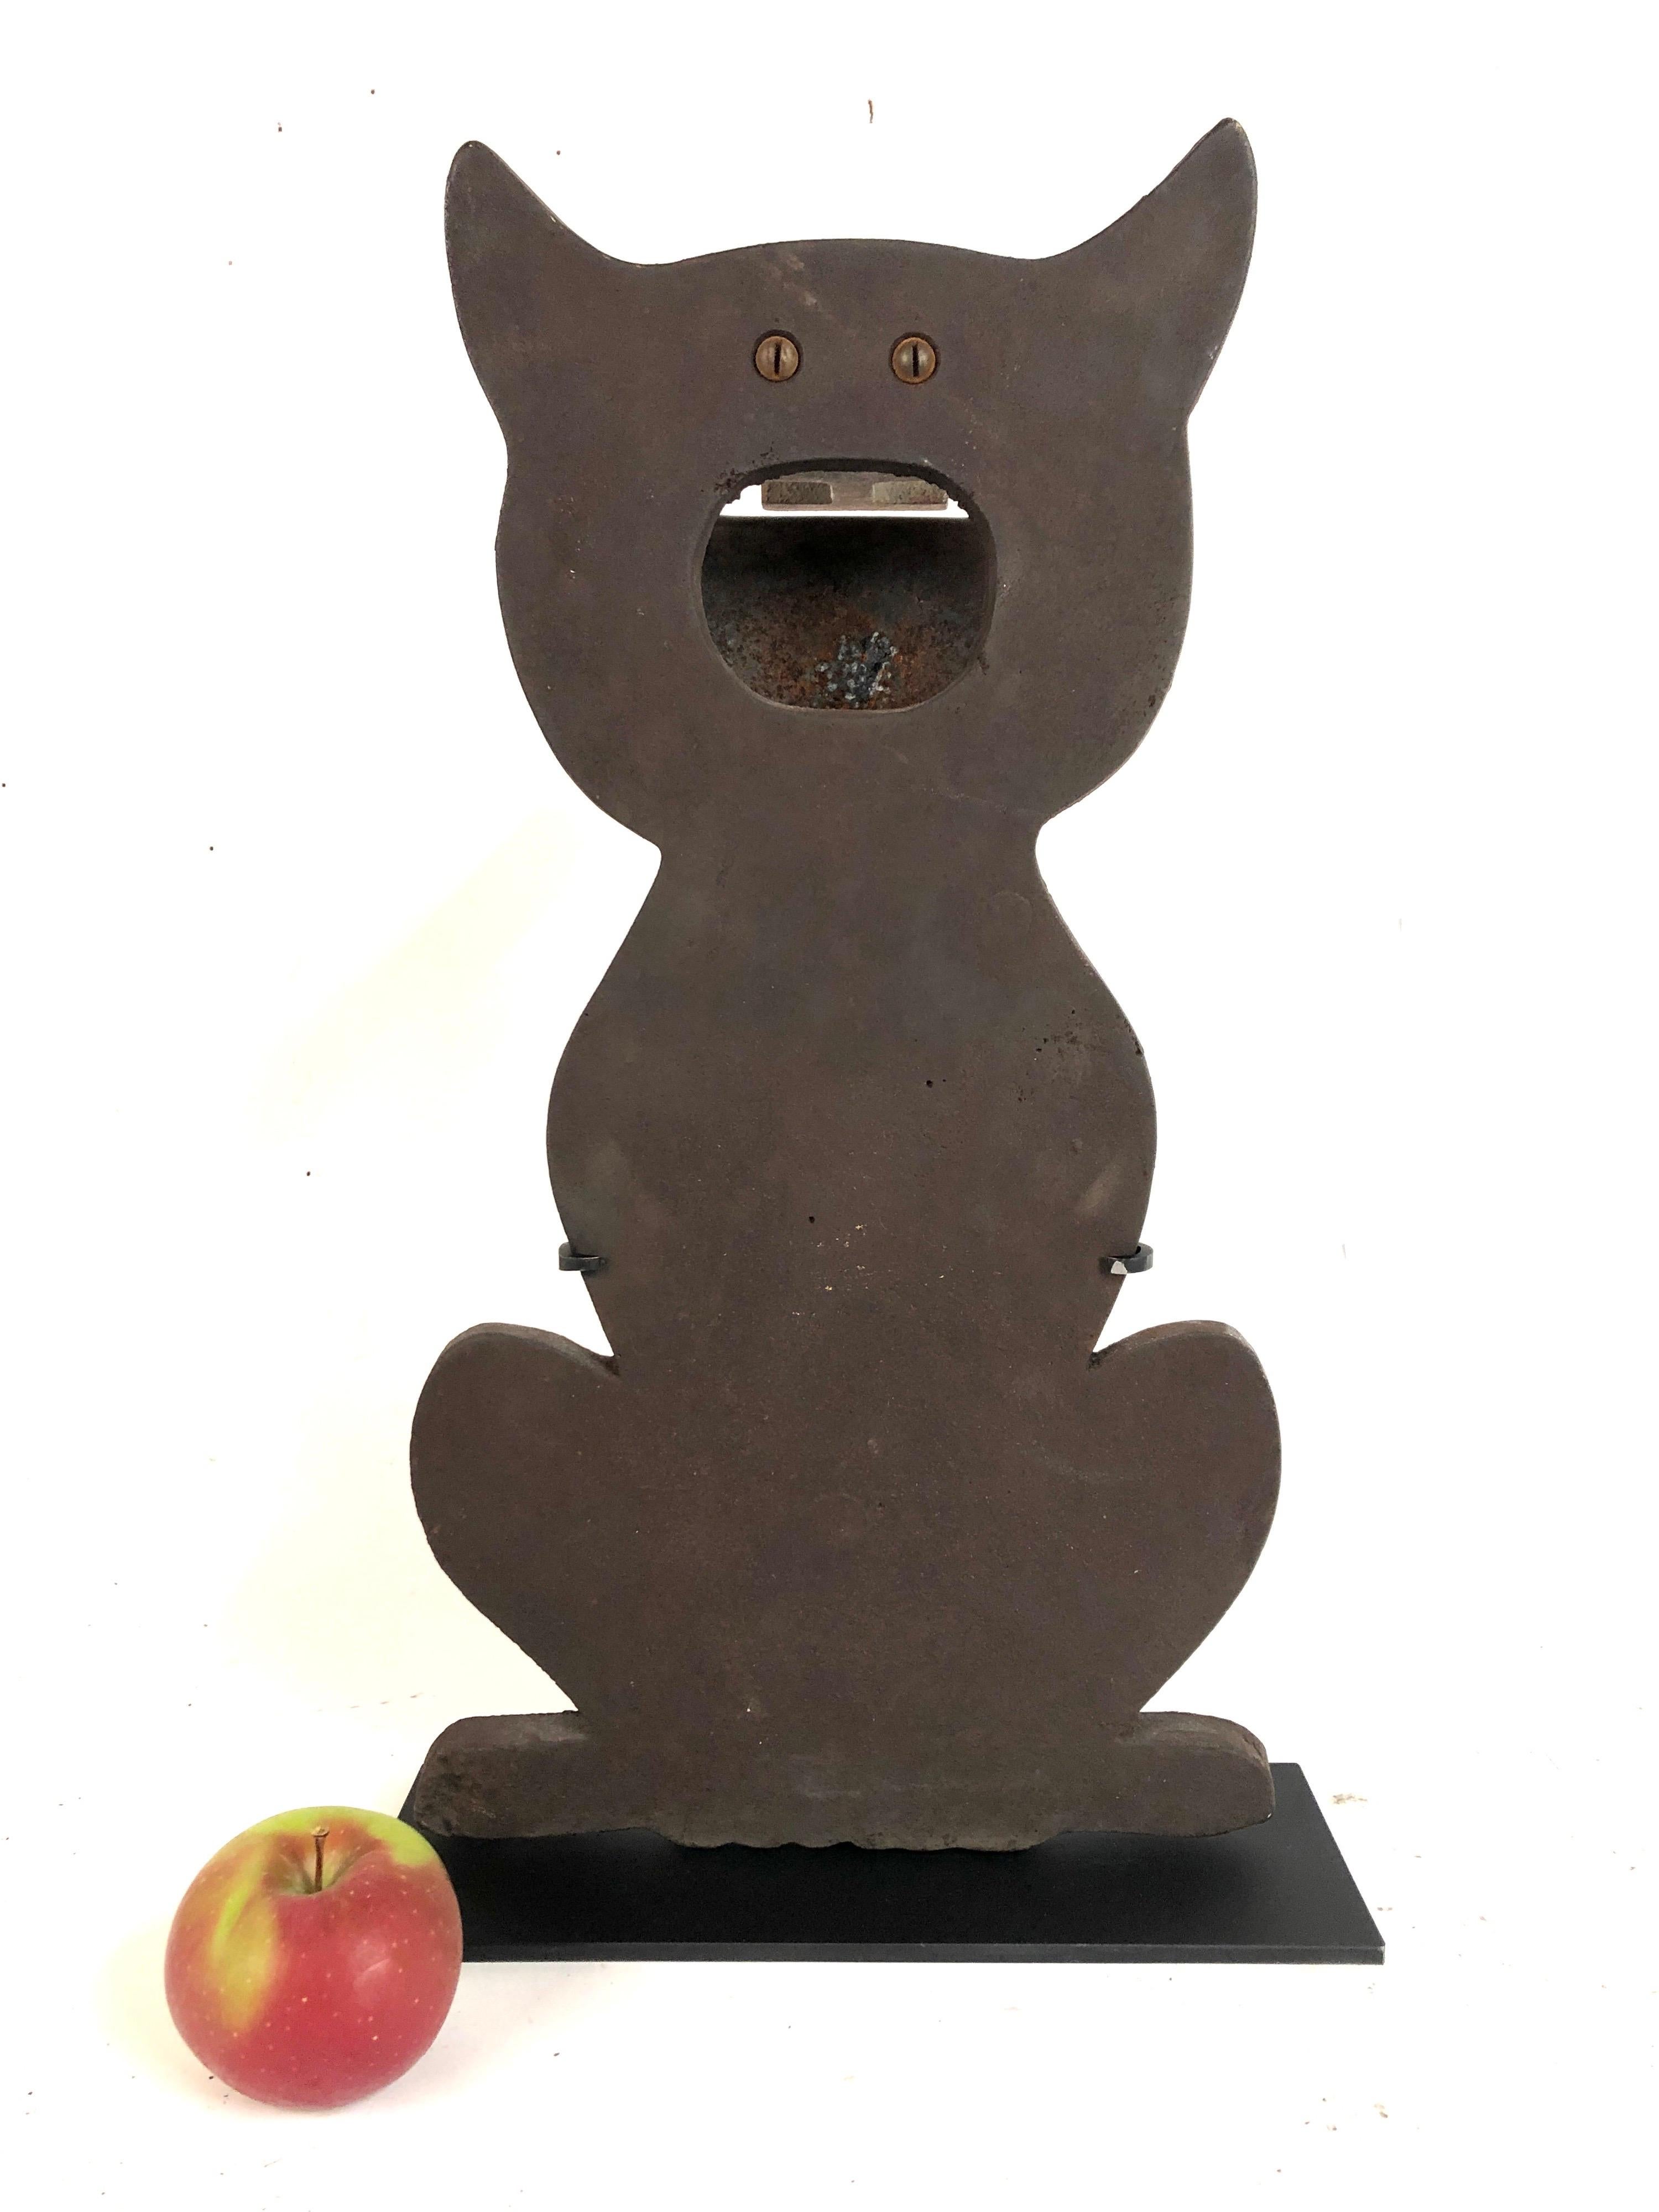 A rare large antique cast iron cat shooting gallery target with original strike plate. Only the wire holding up the 